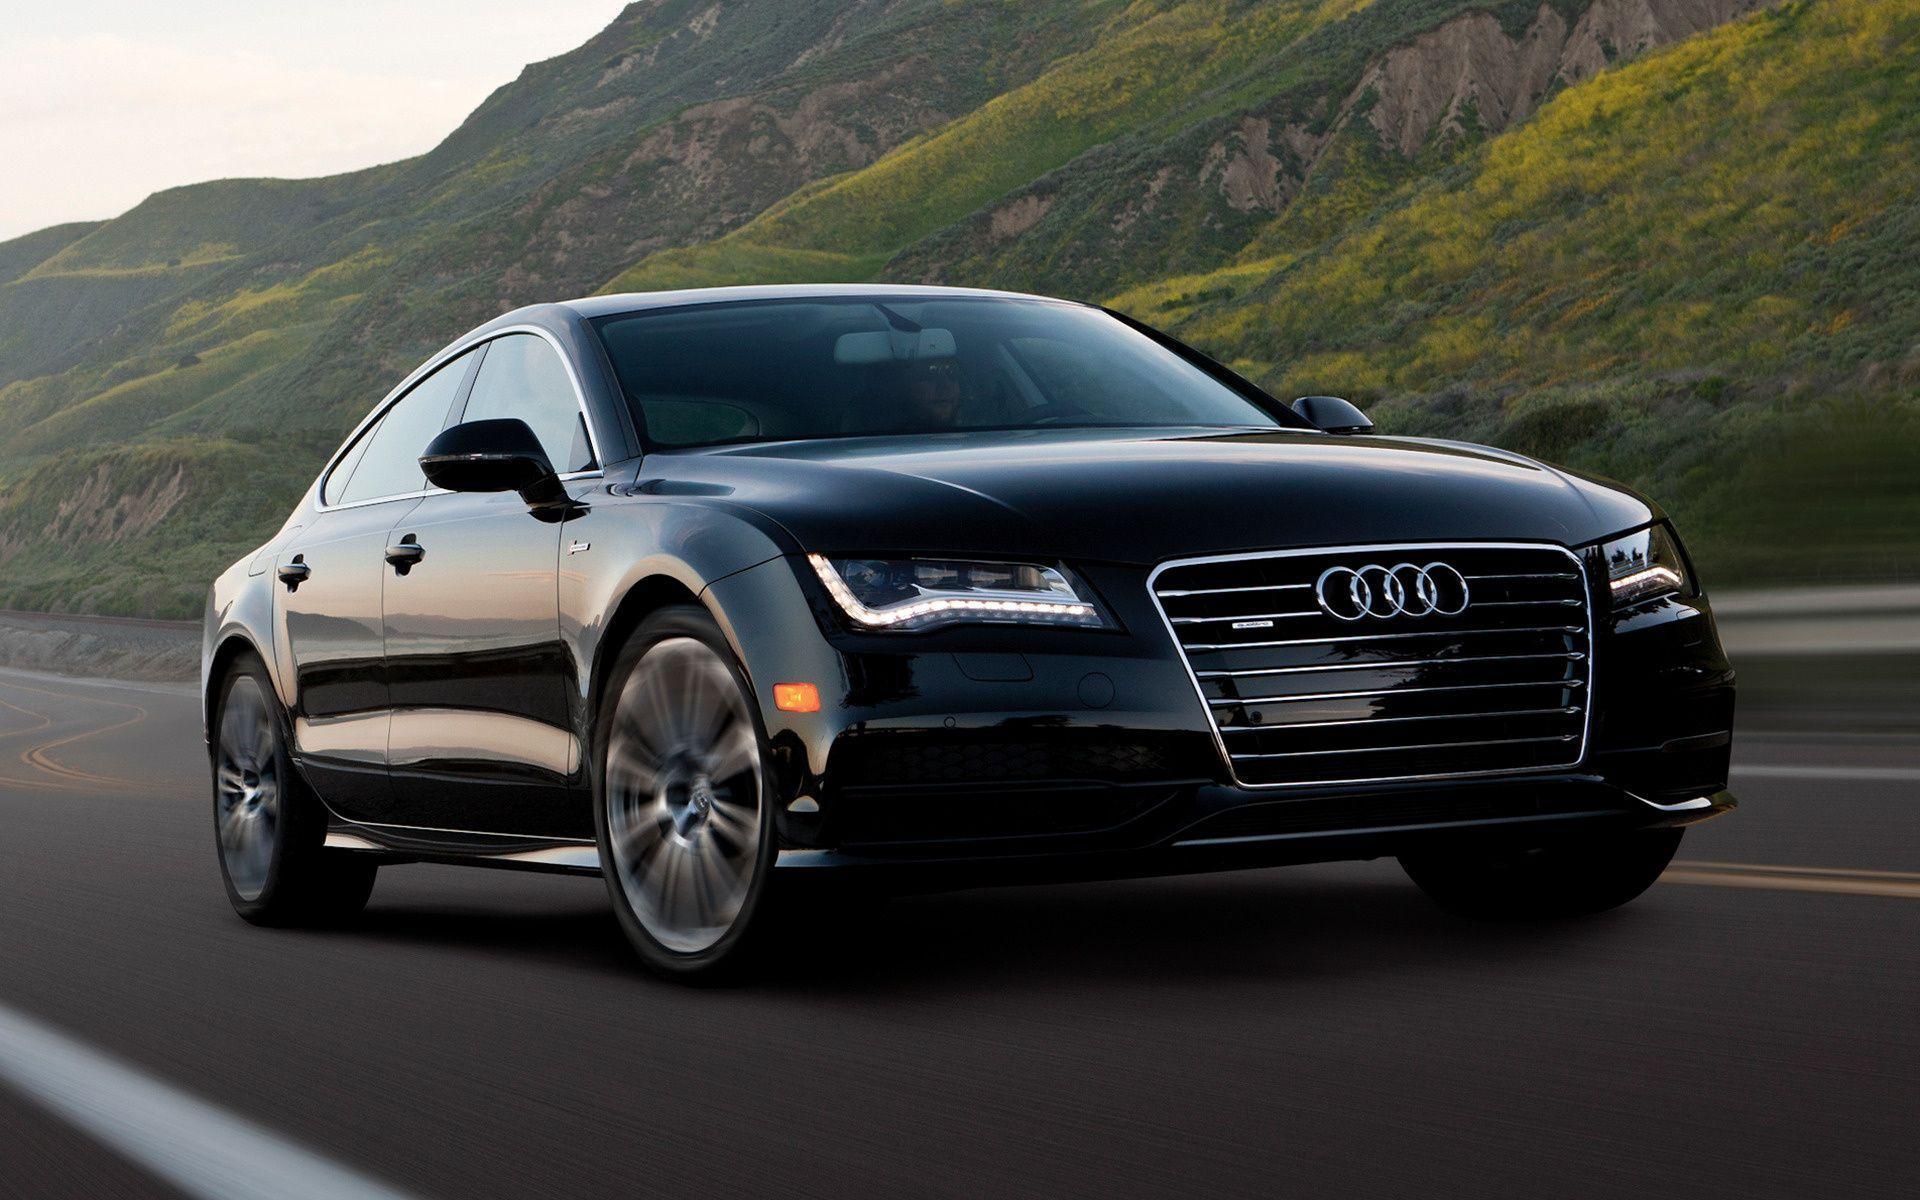 Audi A7 Sportback S line (2011) US Wallpaper and HD Image